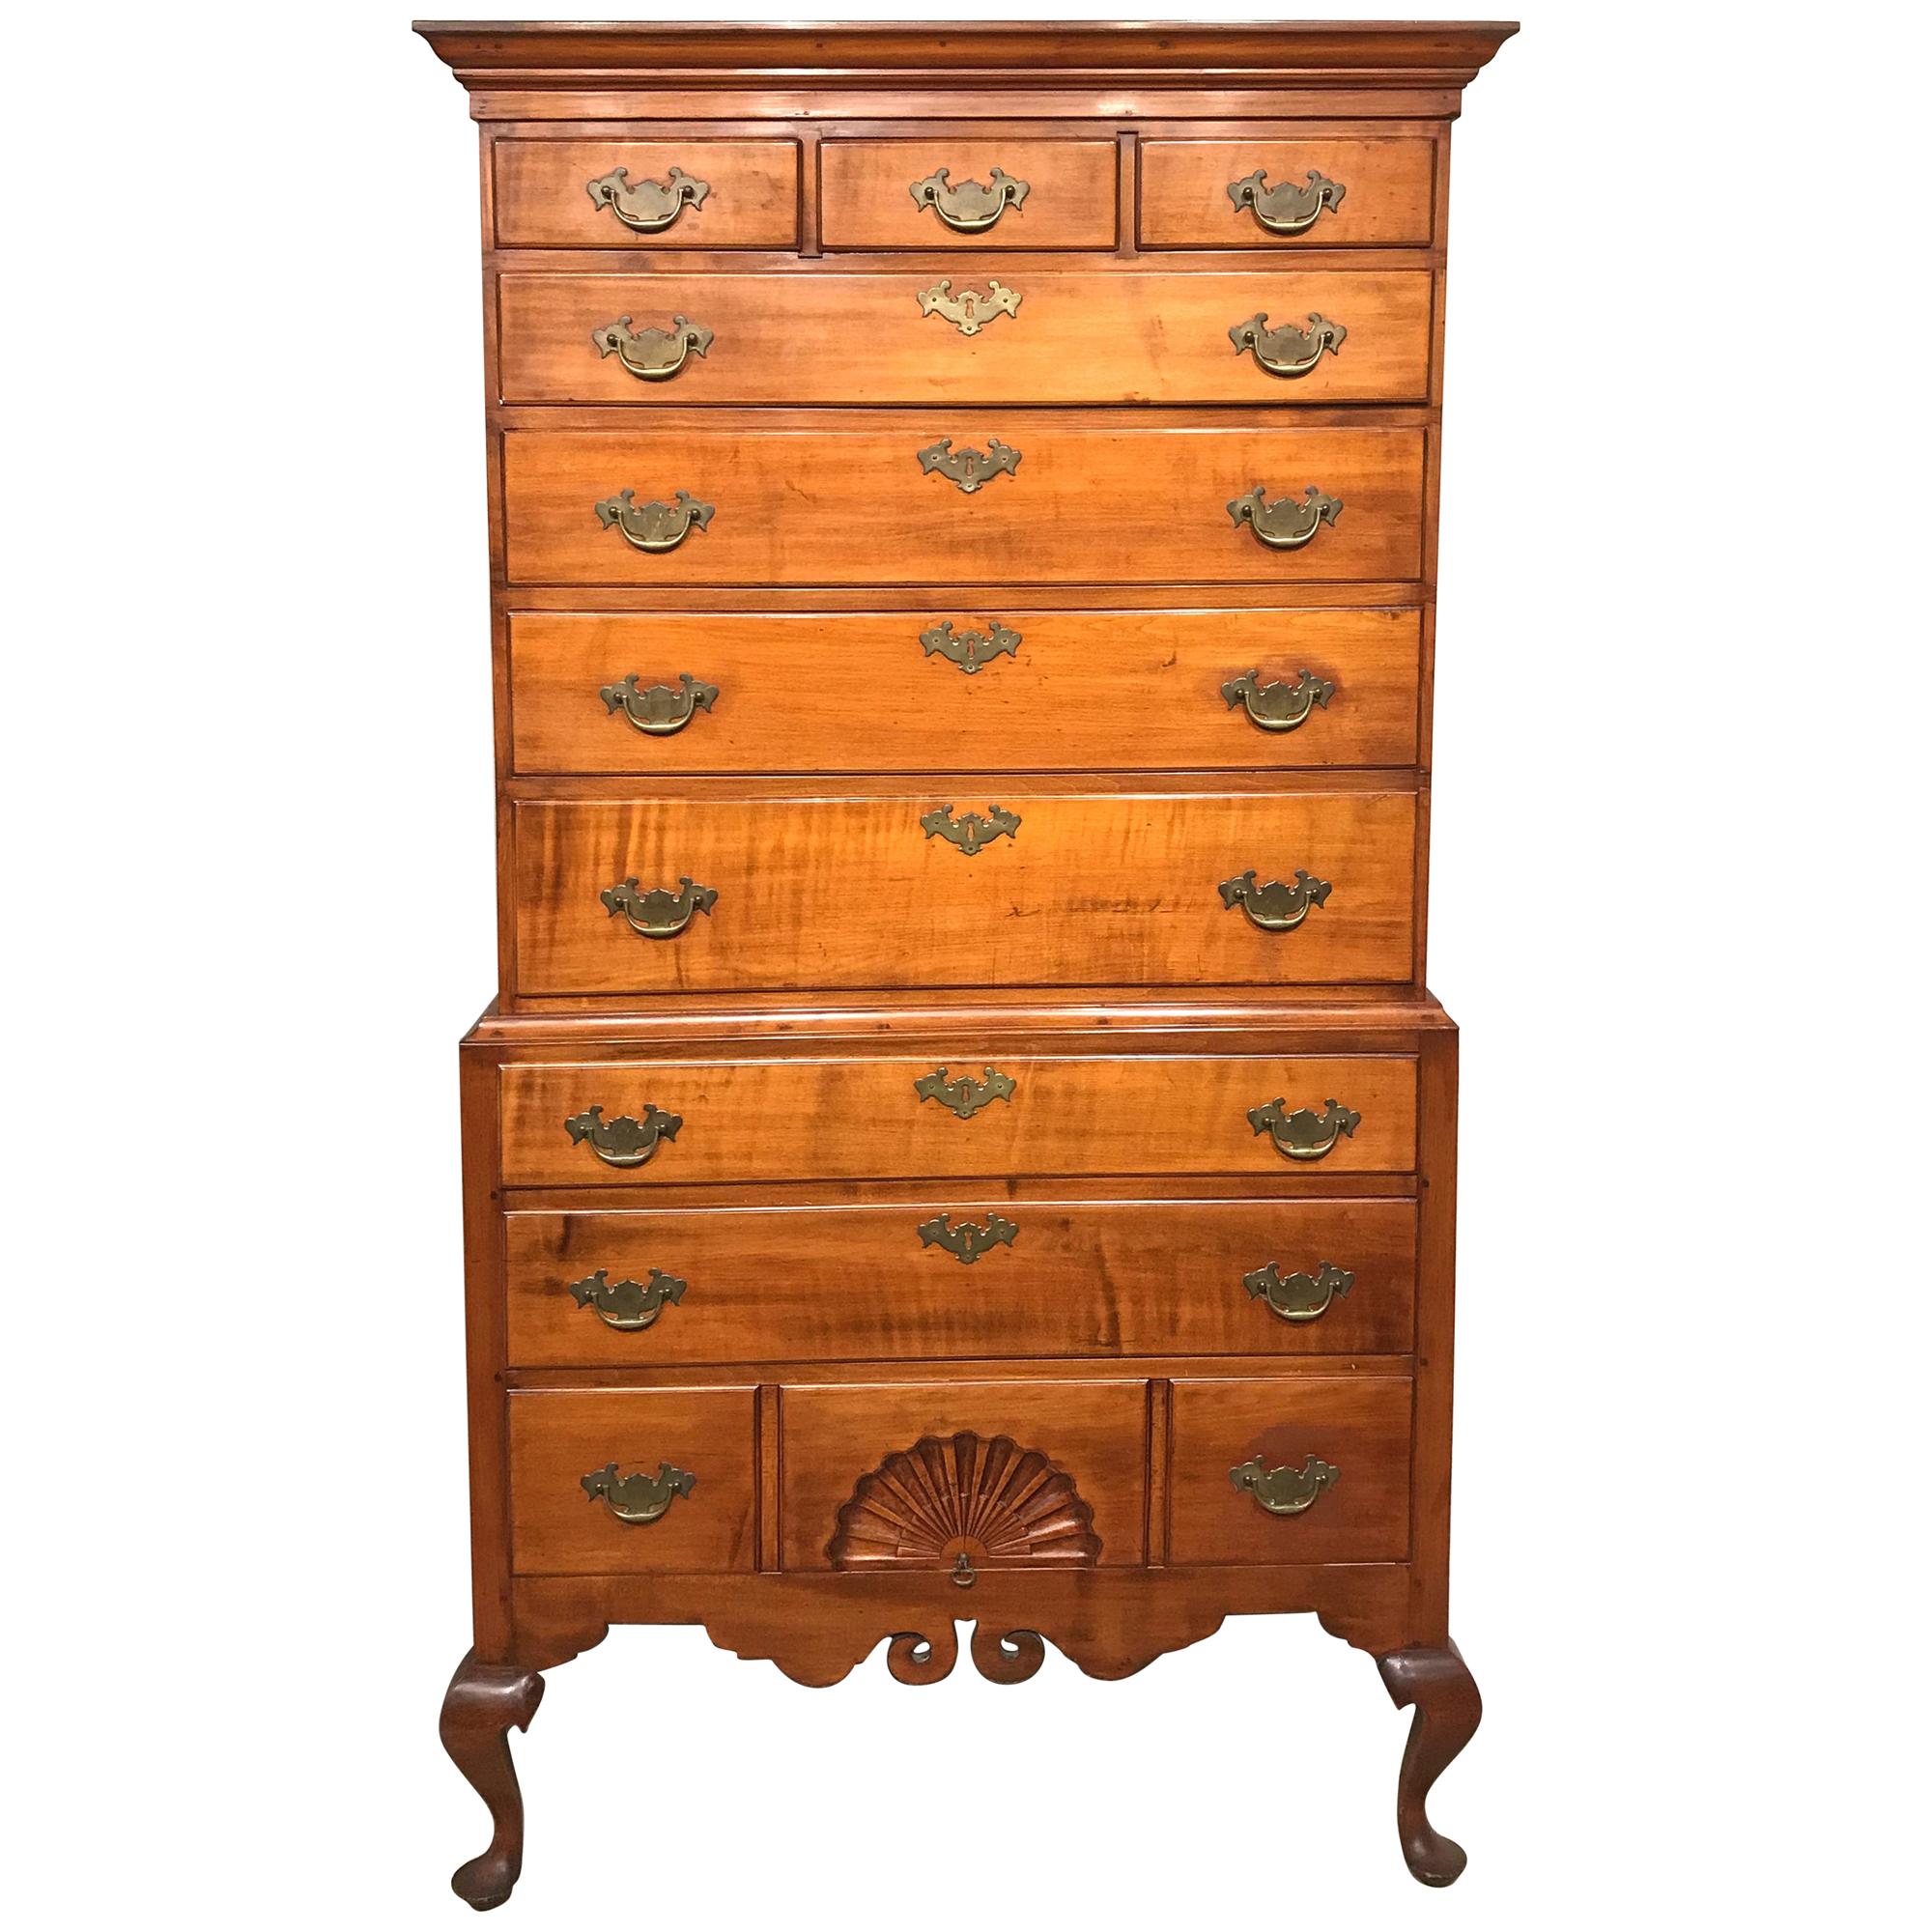 New Hampshire Dunlap School Tiger Maple Chest on Chest or Highboy, circa 1780